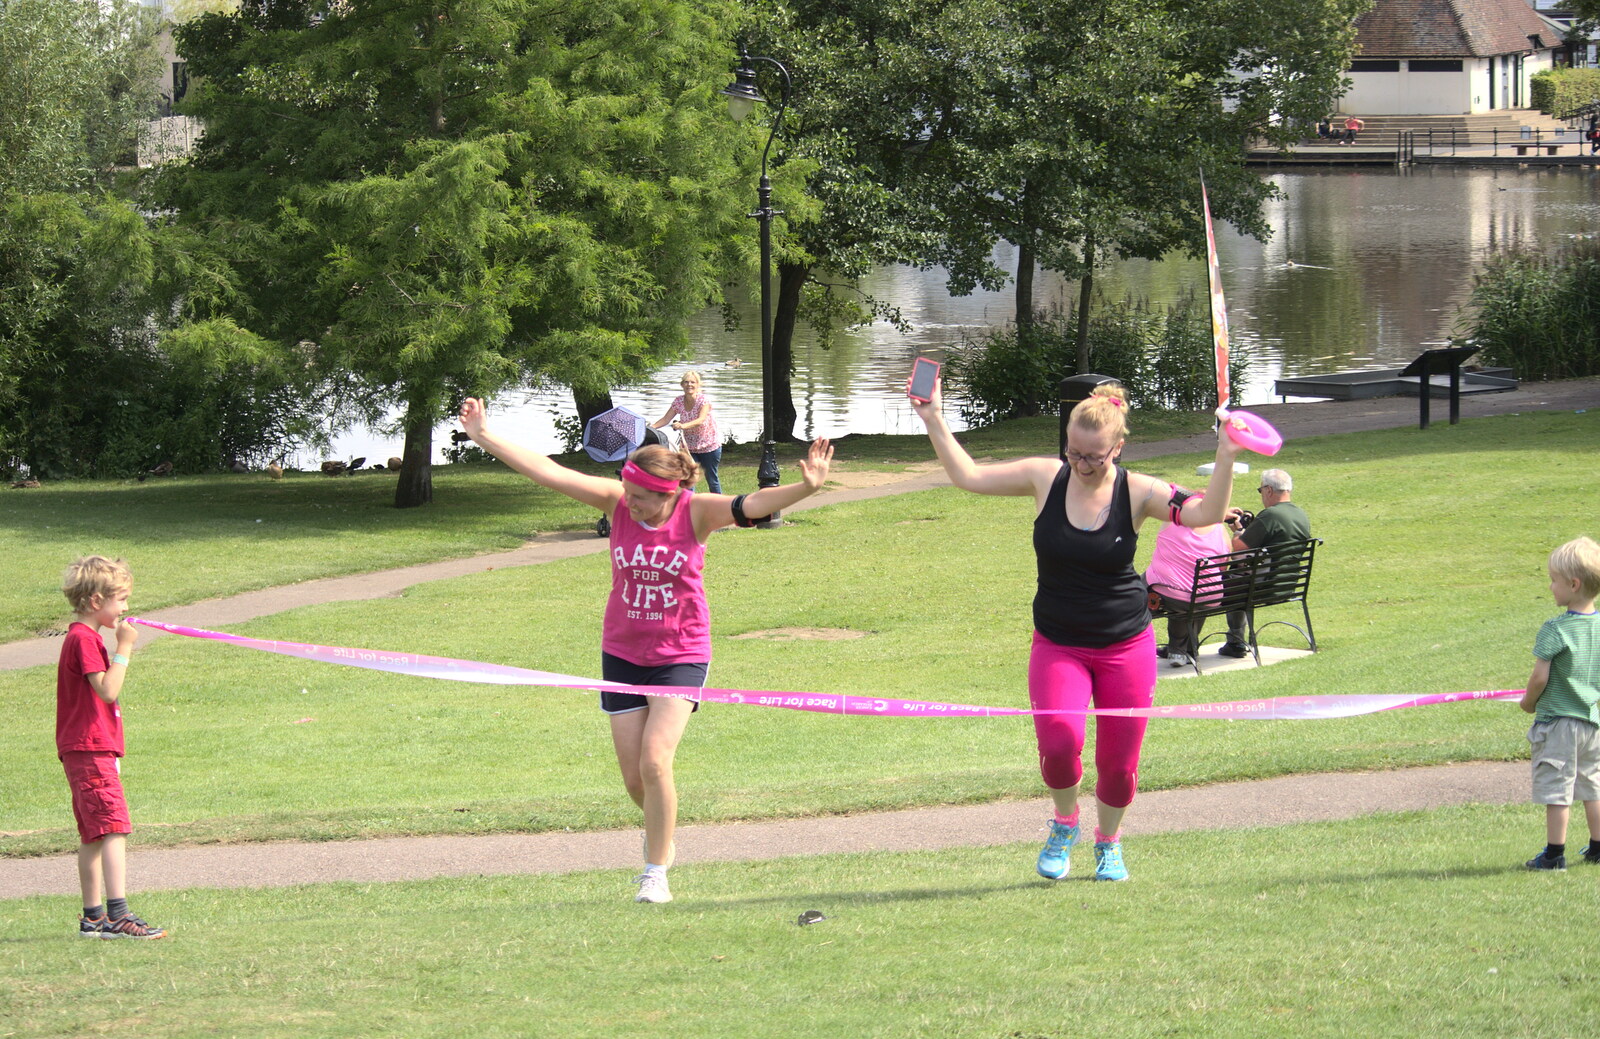 Isobel crosses the finishing line from A Race For Life, The Park, Diss, Norfolk - 16th August 2015